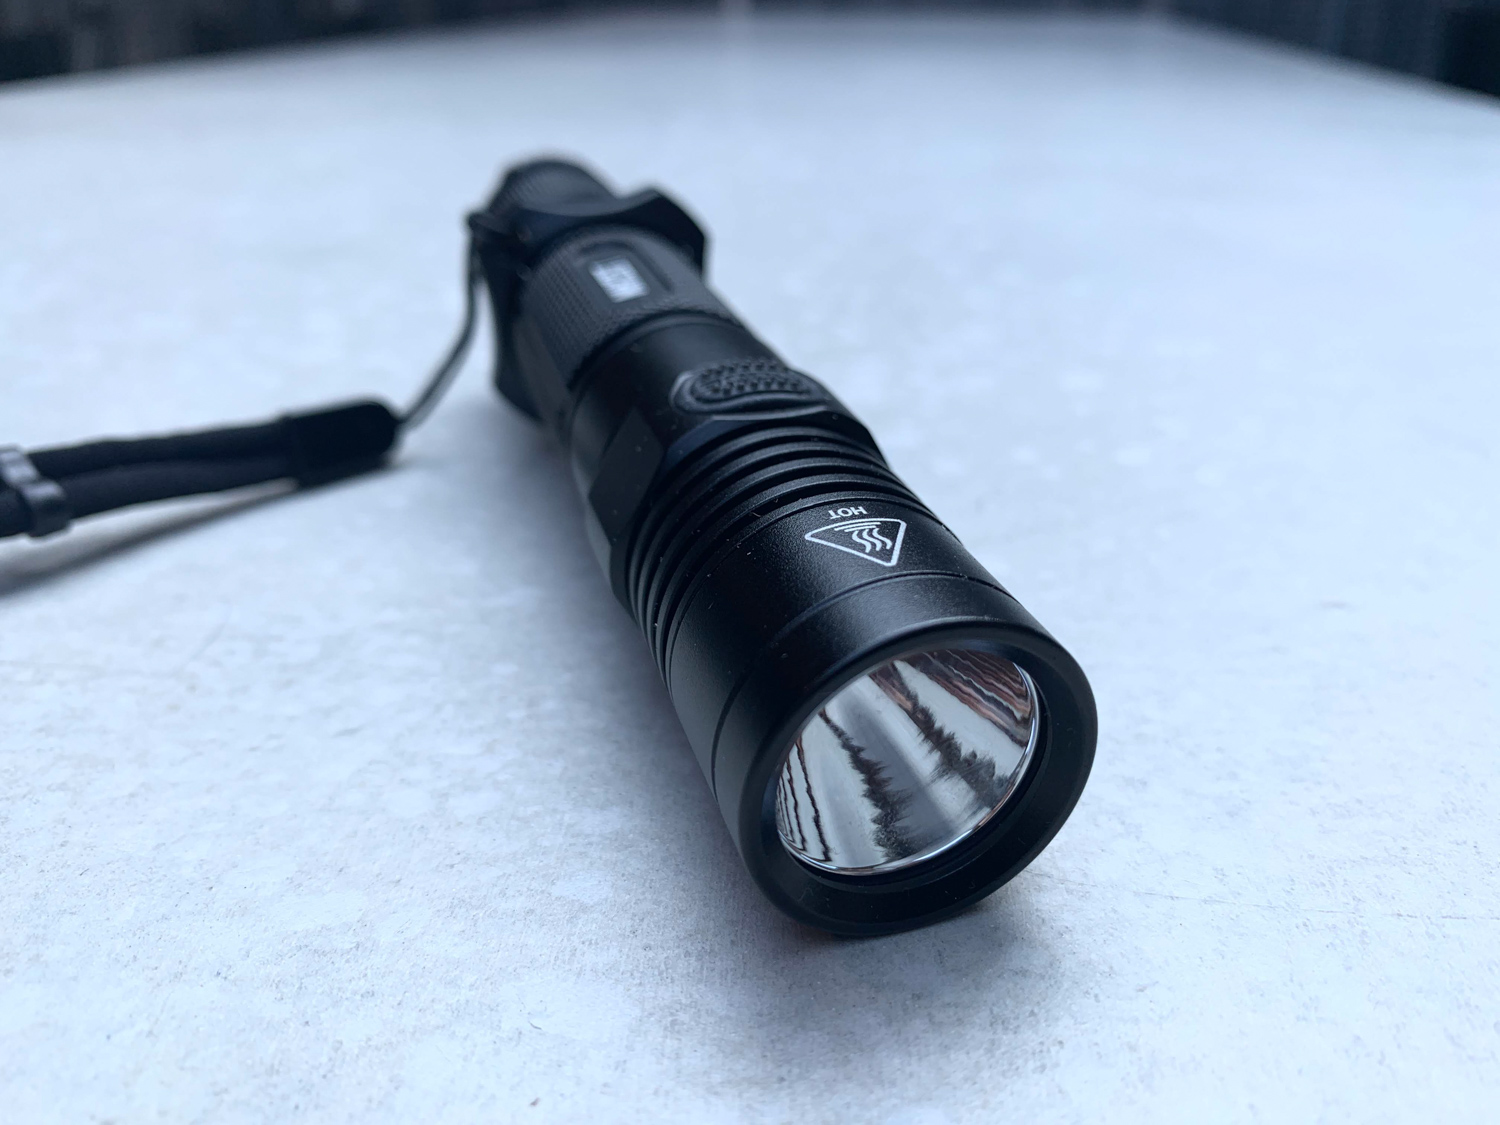 A rechargeable flashlight that works as well as it looks.